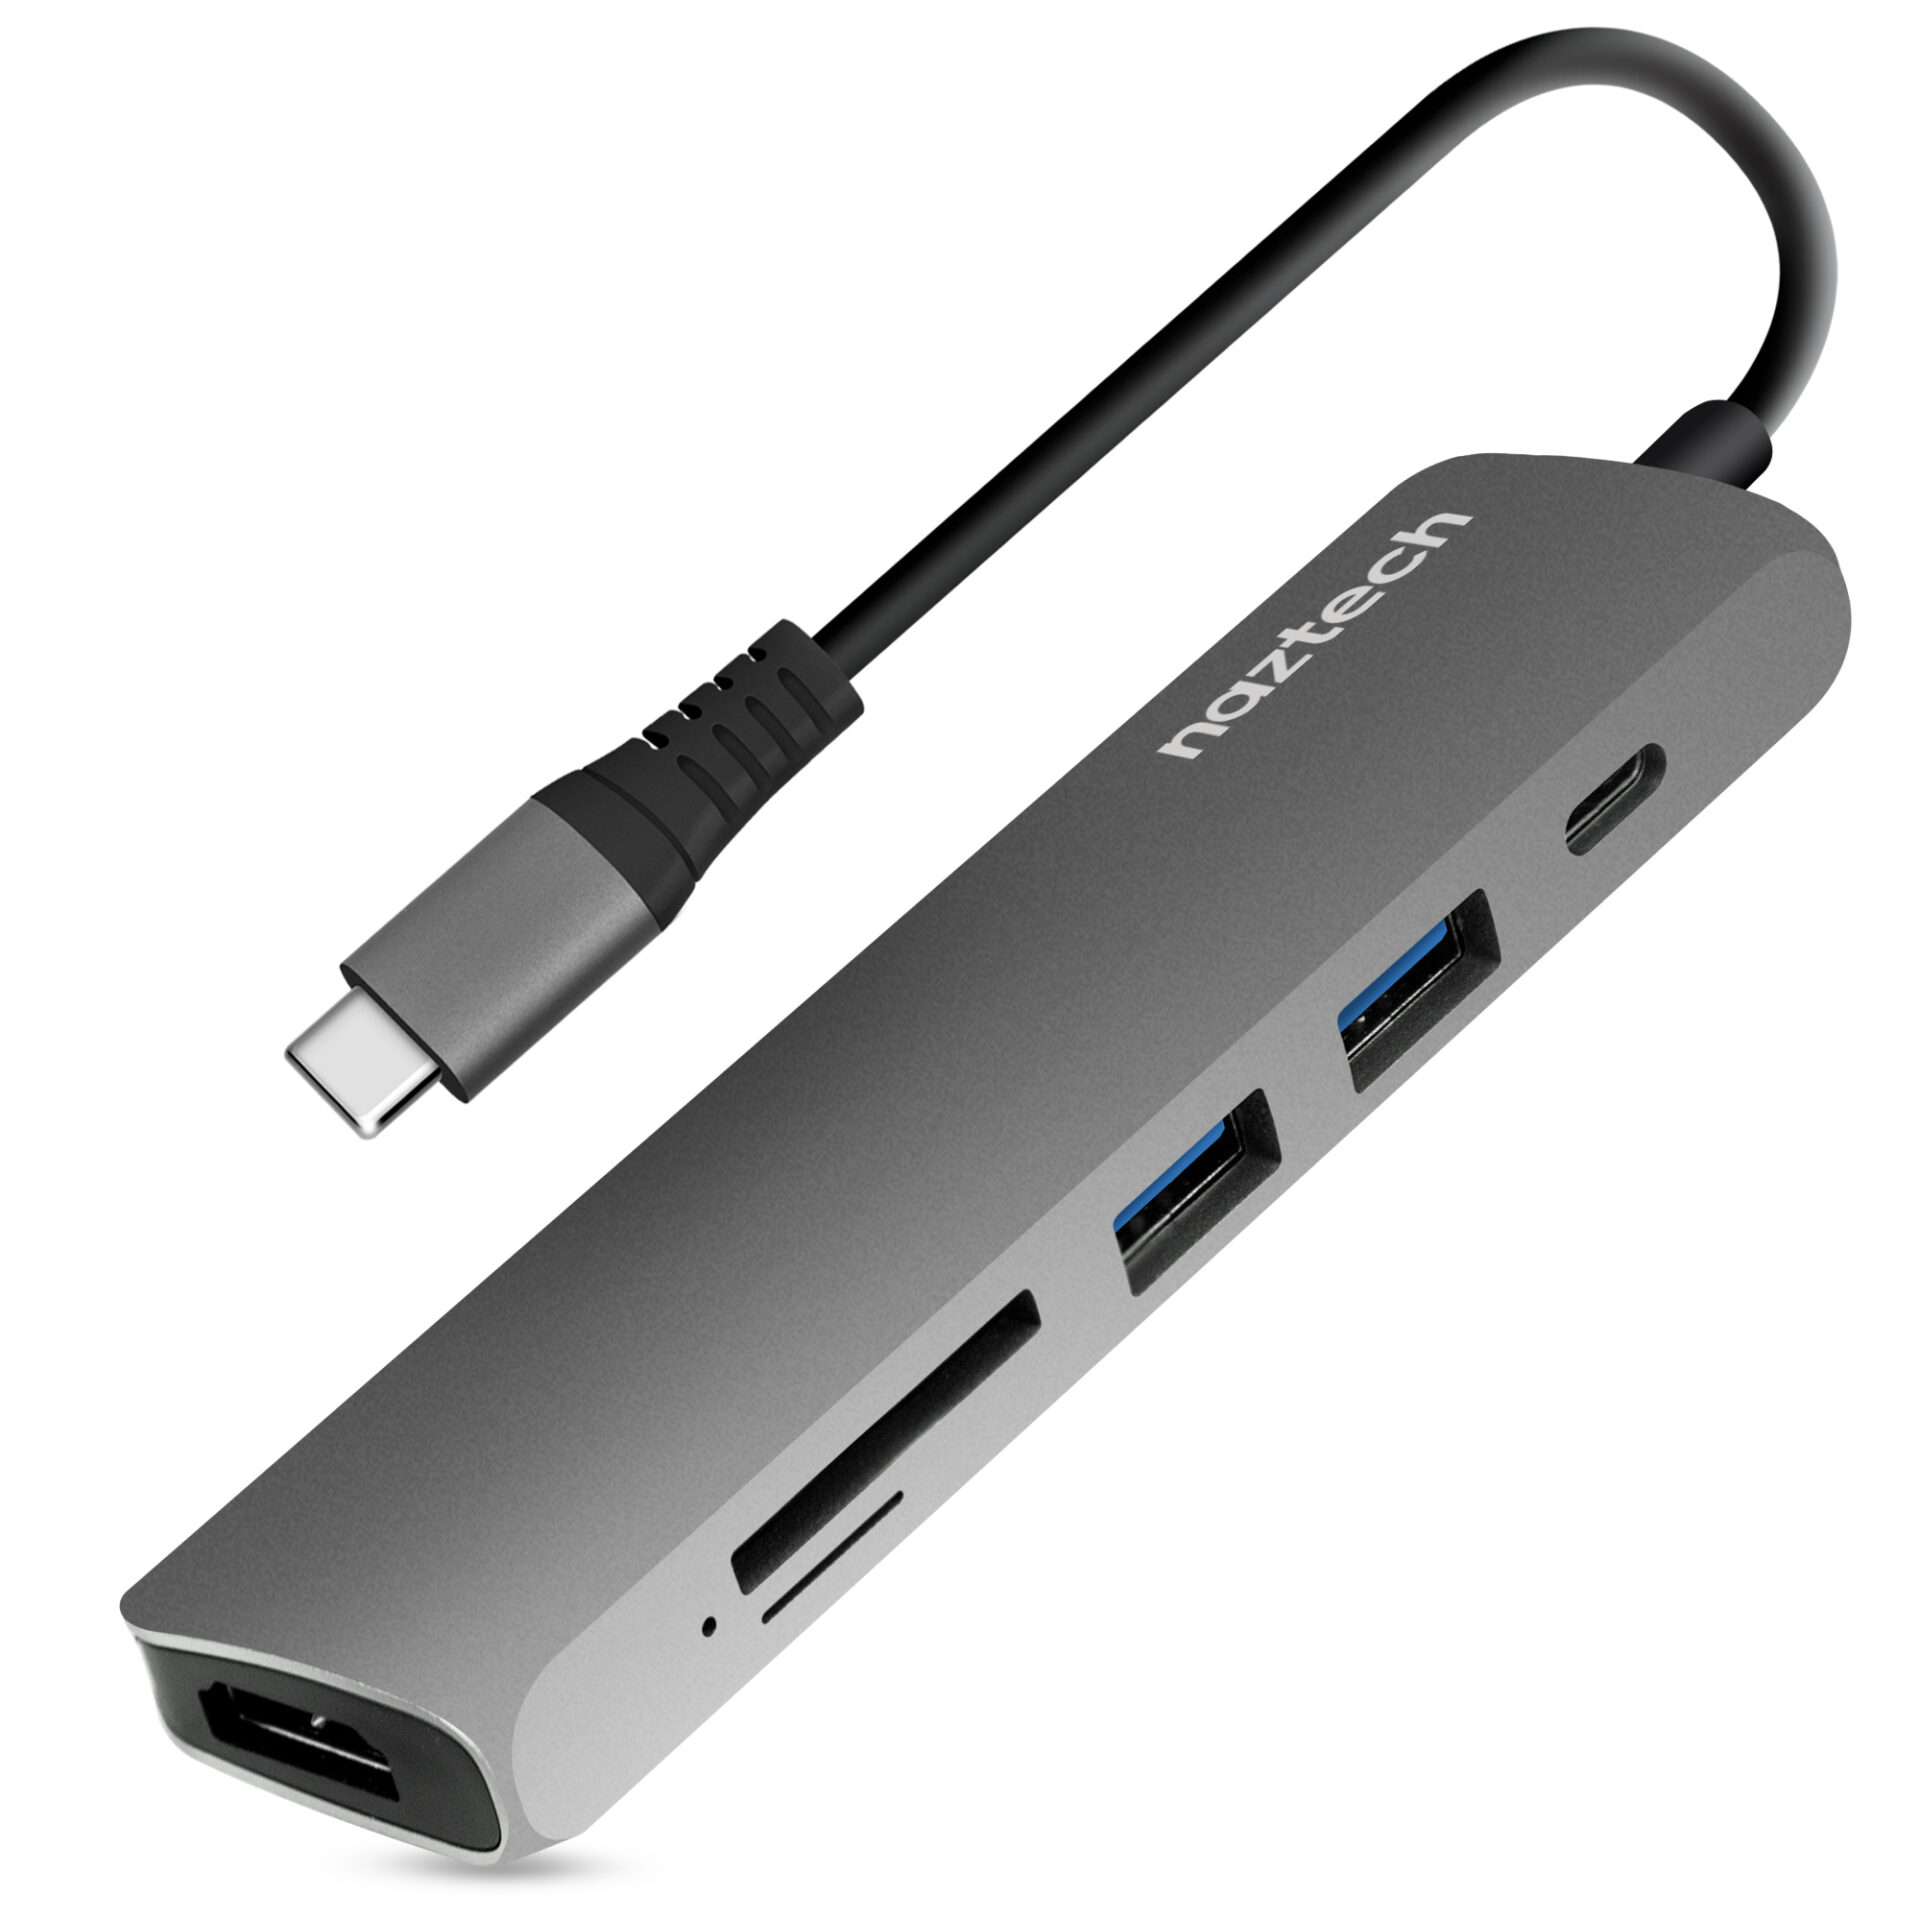 All In One USB-C Adapter Hub - Space Grey